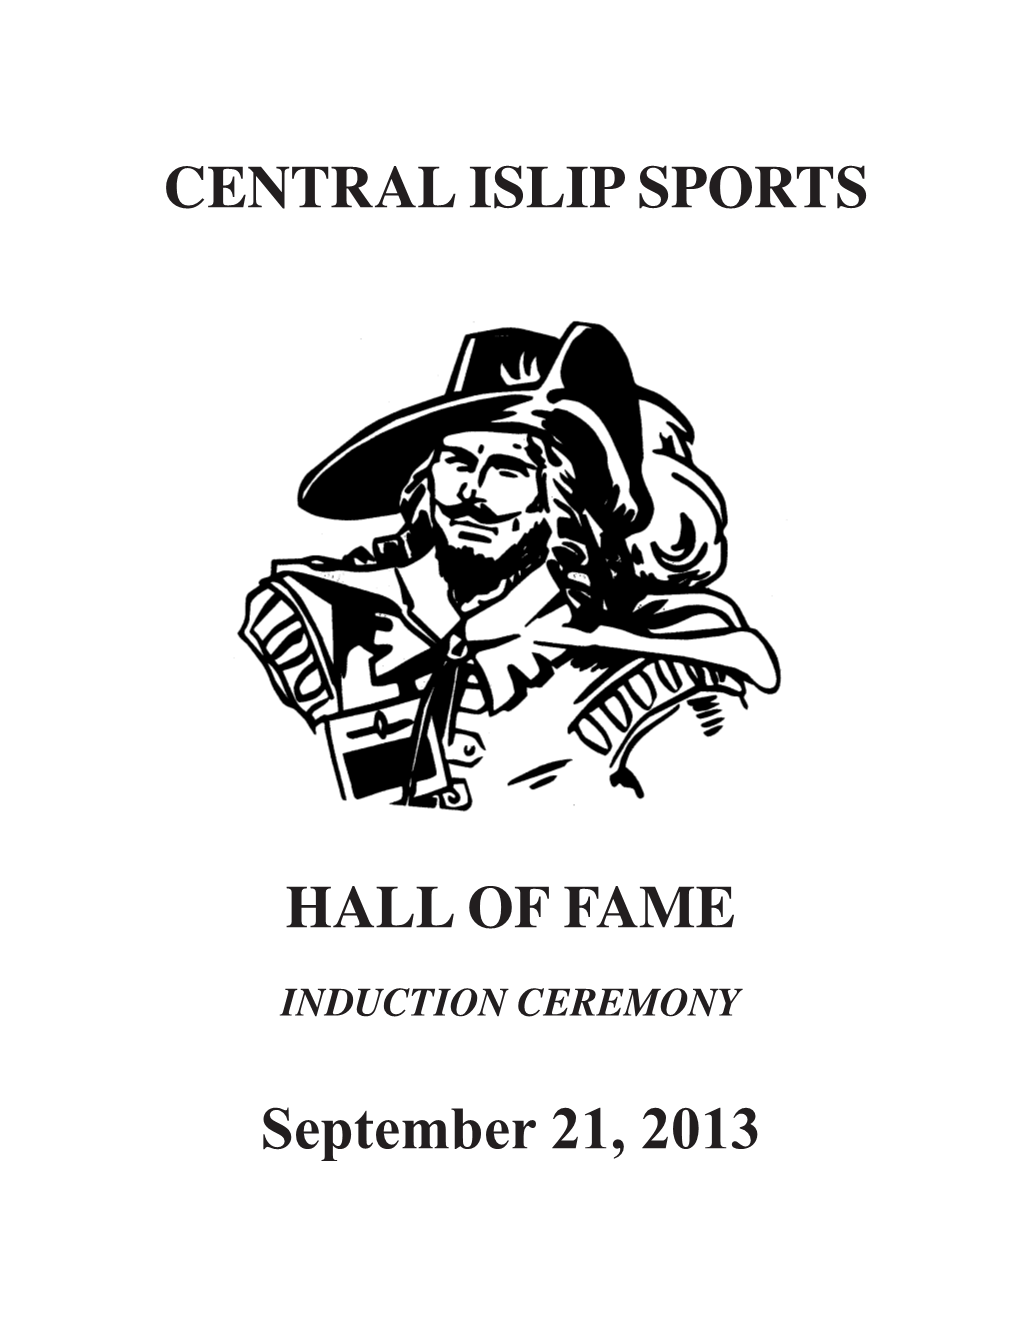 CENTRAL ISLIP SPORTS HALL of FAME September 21, 2013